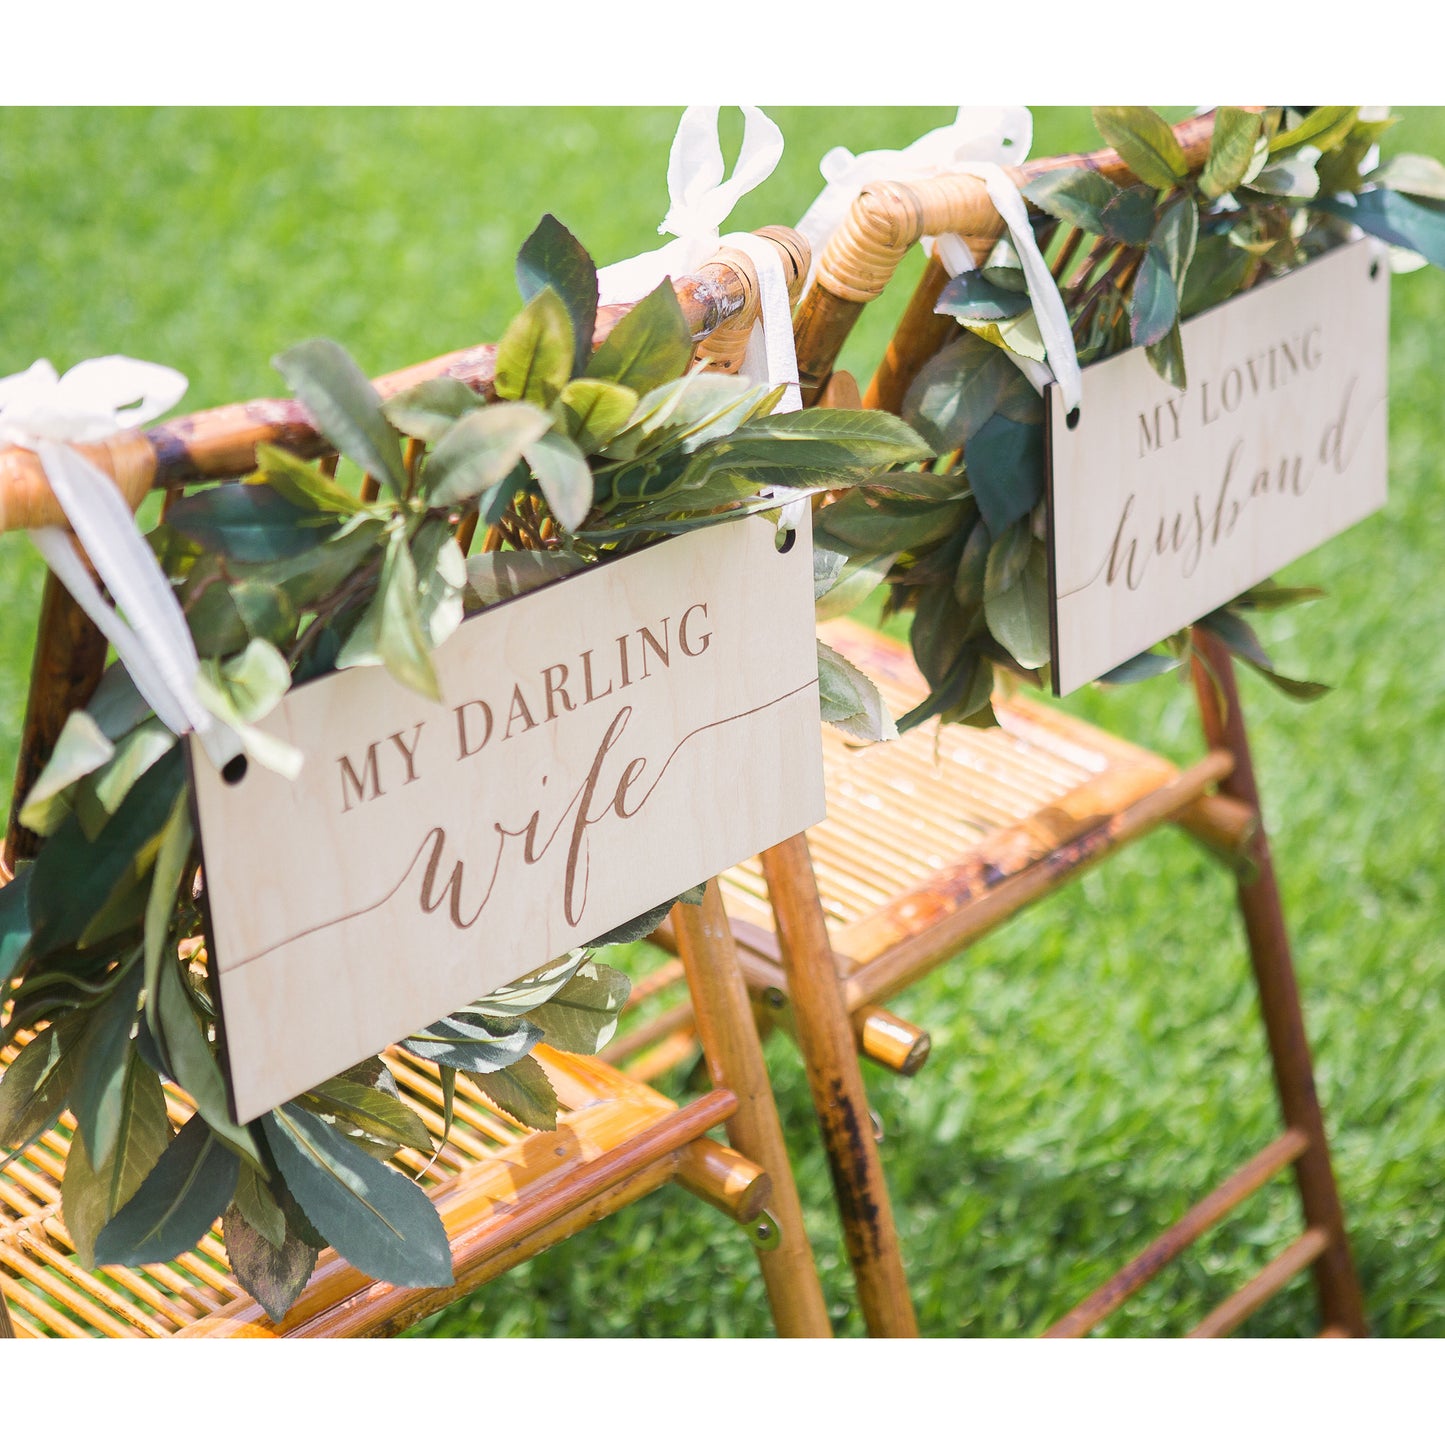 Darling Wife, Loving Husband Chair Signs - Wedding Decor Gifts